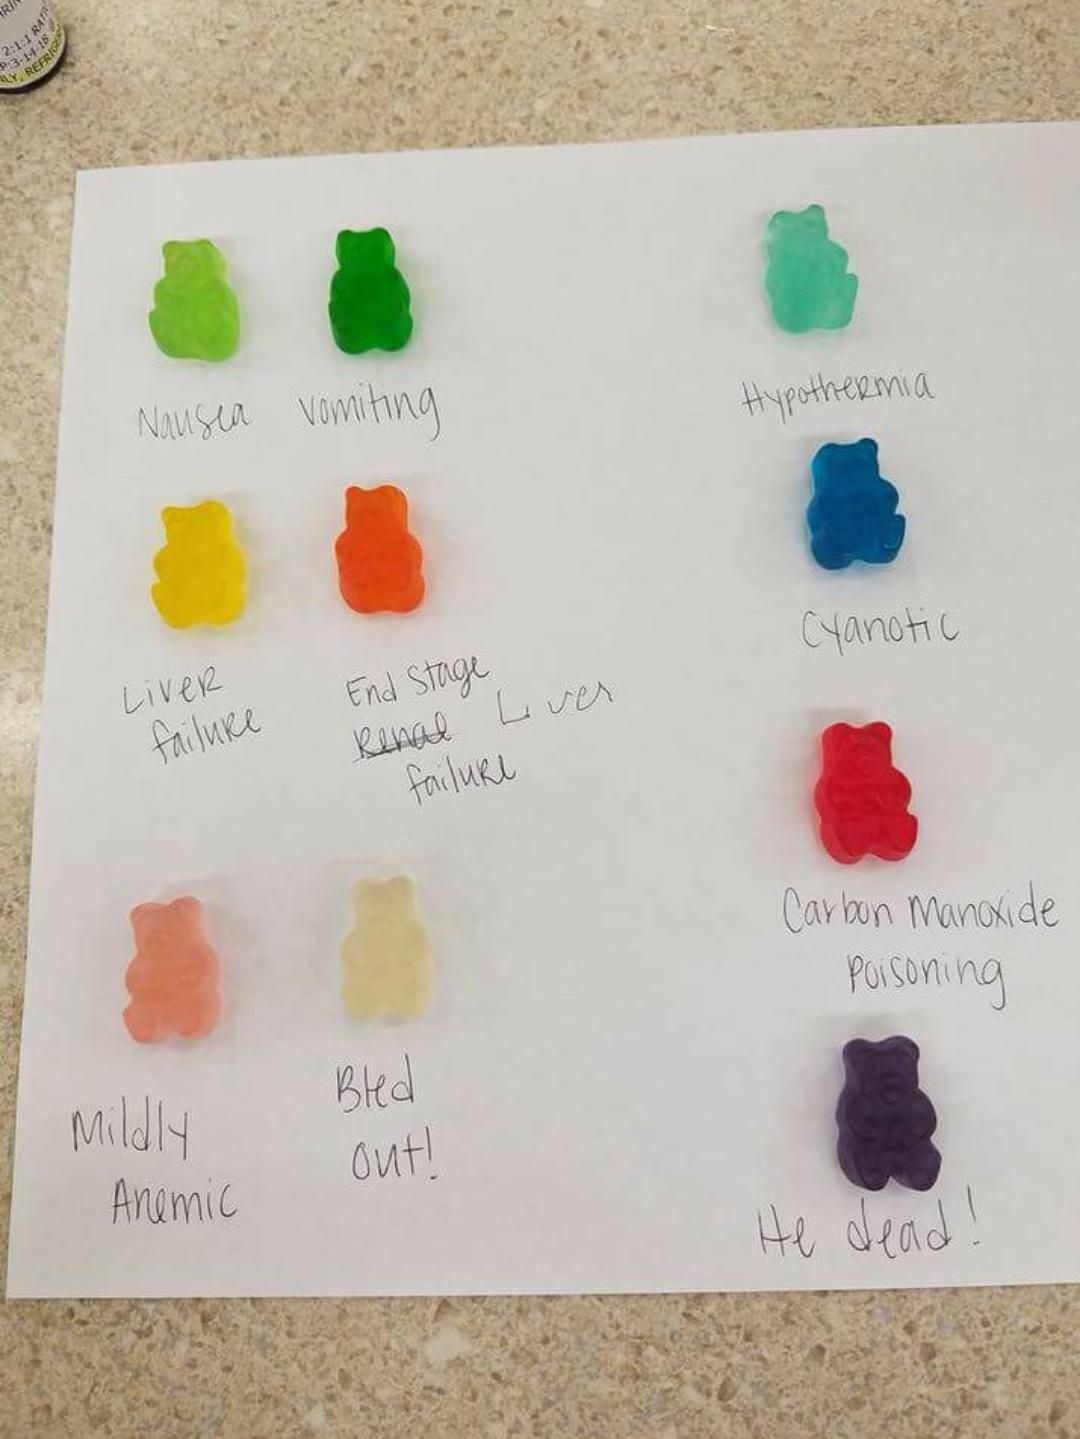 An ER nurse and her coworkers decided gummy bears needed to be renamed...